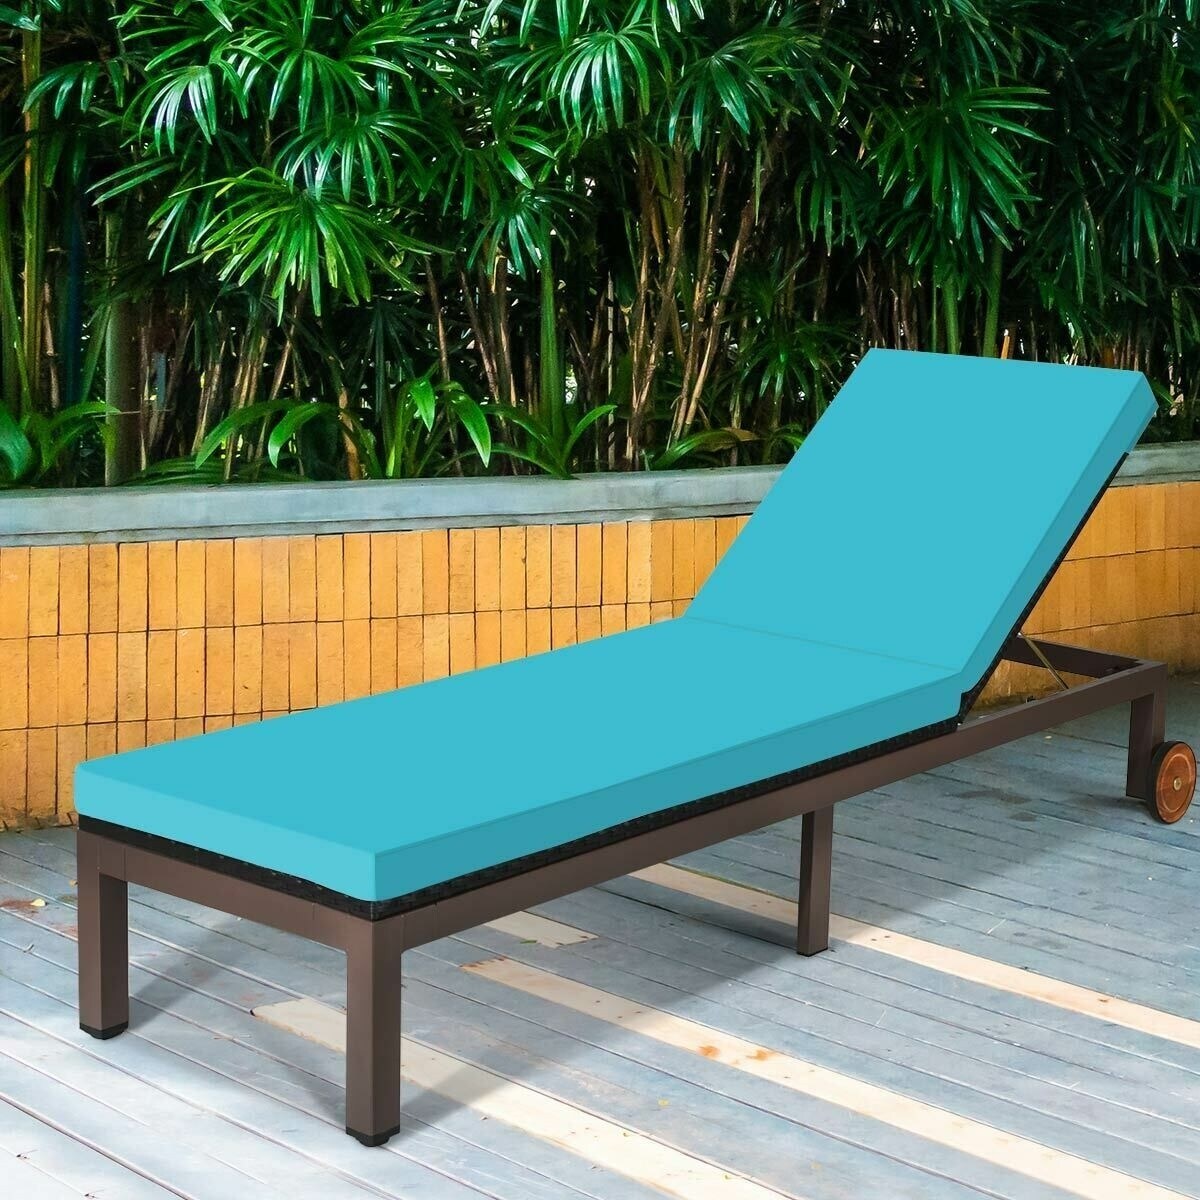 Pool Balcony Furniture Turquoise HTTH 2pcs Rattan Chaise Lounge Outdoor Patio Chairs All-Weather Sun Chaise Lounge Furniture for Backyard